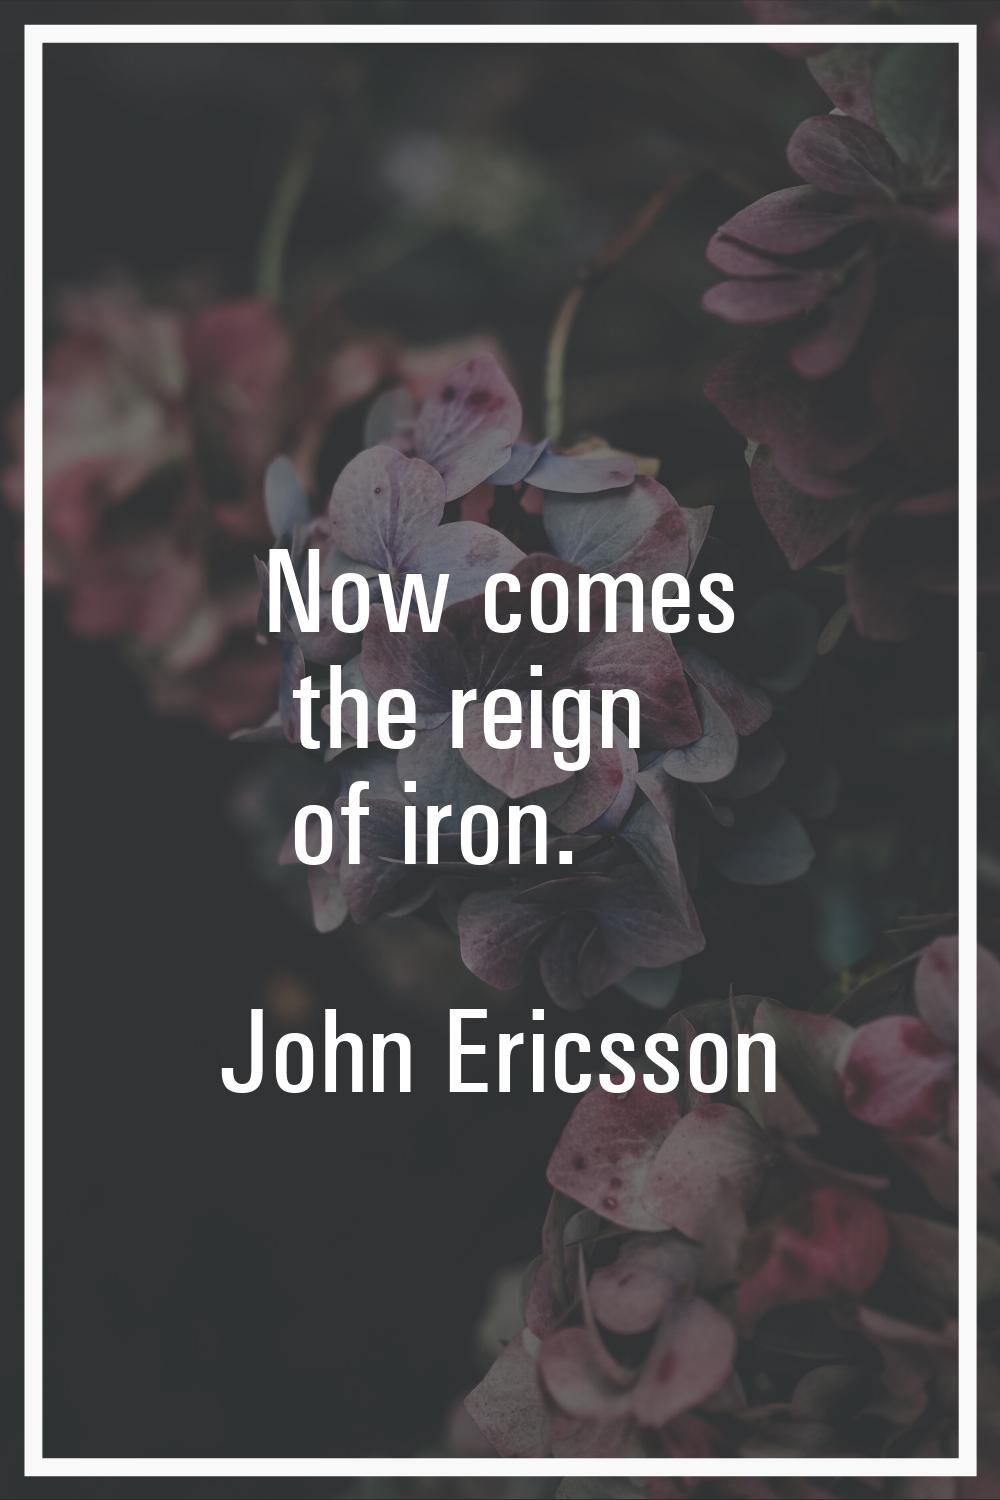 Now comes the reign of iron.